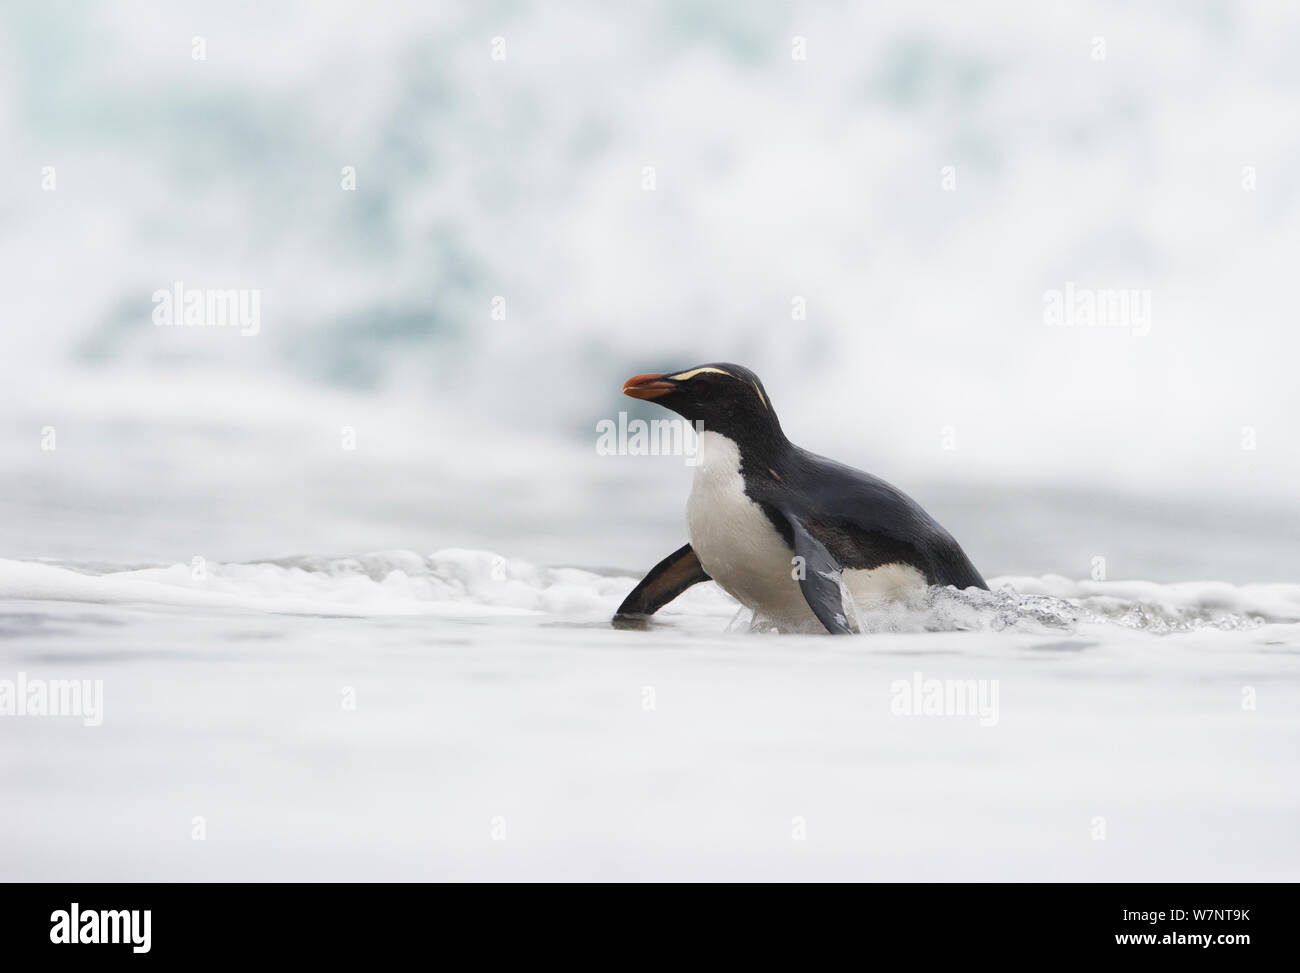 Fiordland crested penguin (Eudyptes pachyrhynchus) in shallow water, Westland, New Zealand, Vulnerable species. November. Stock Photo